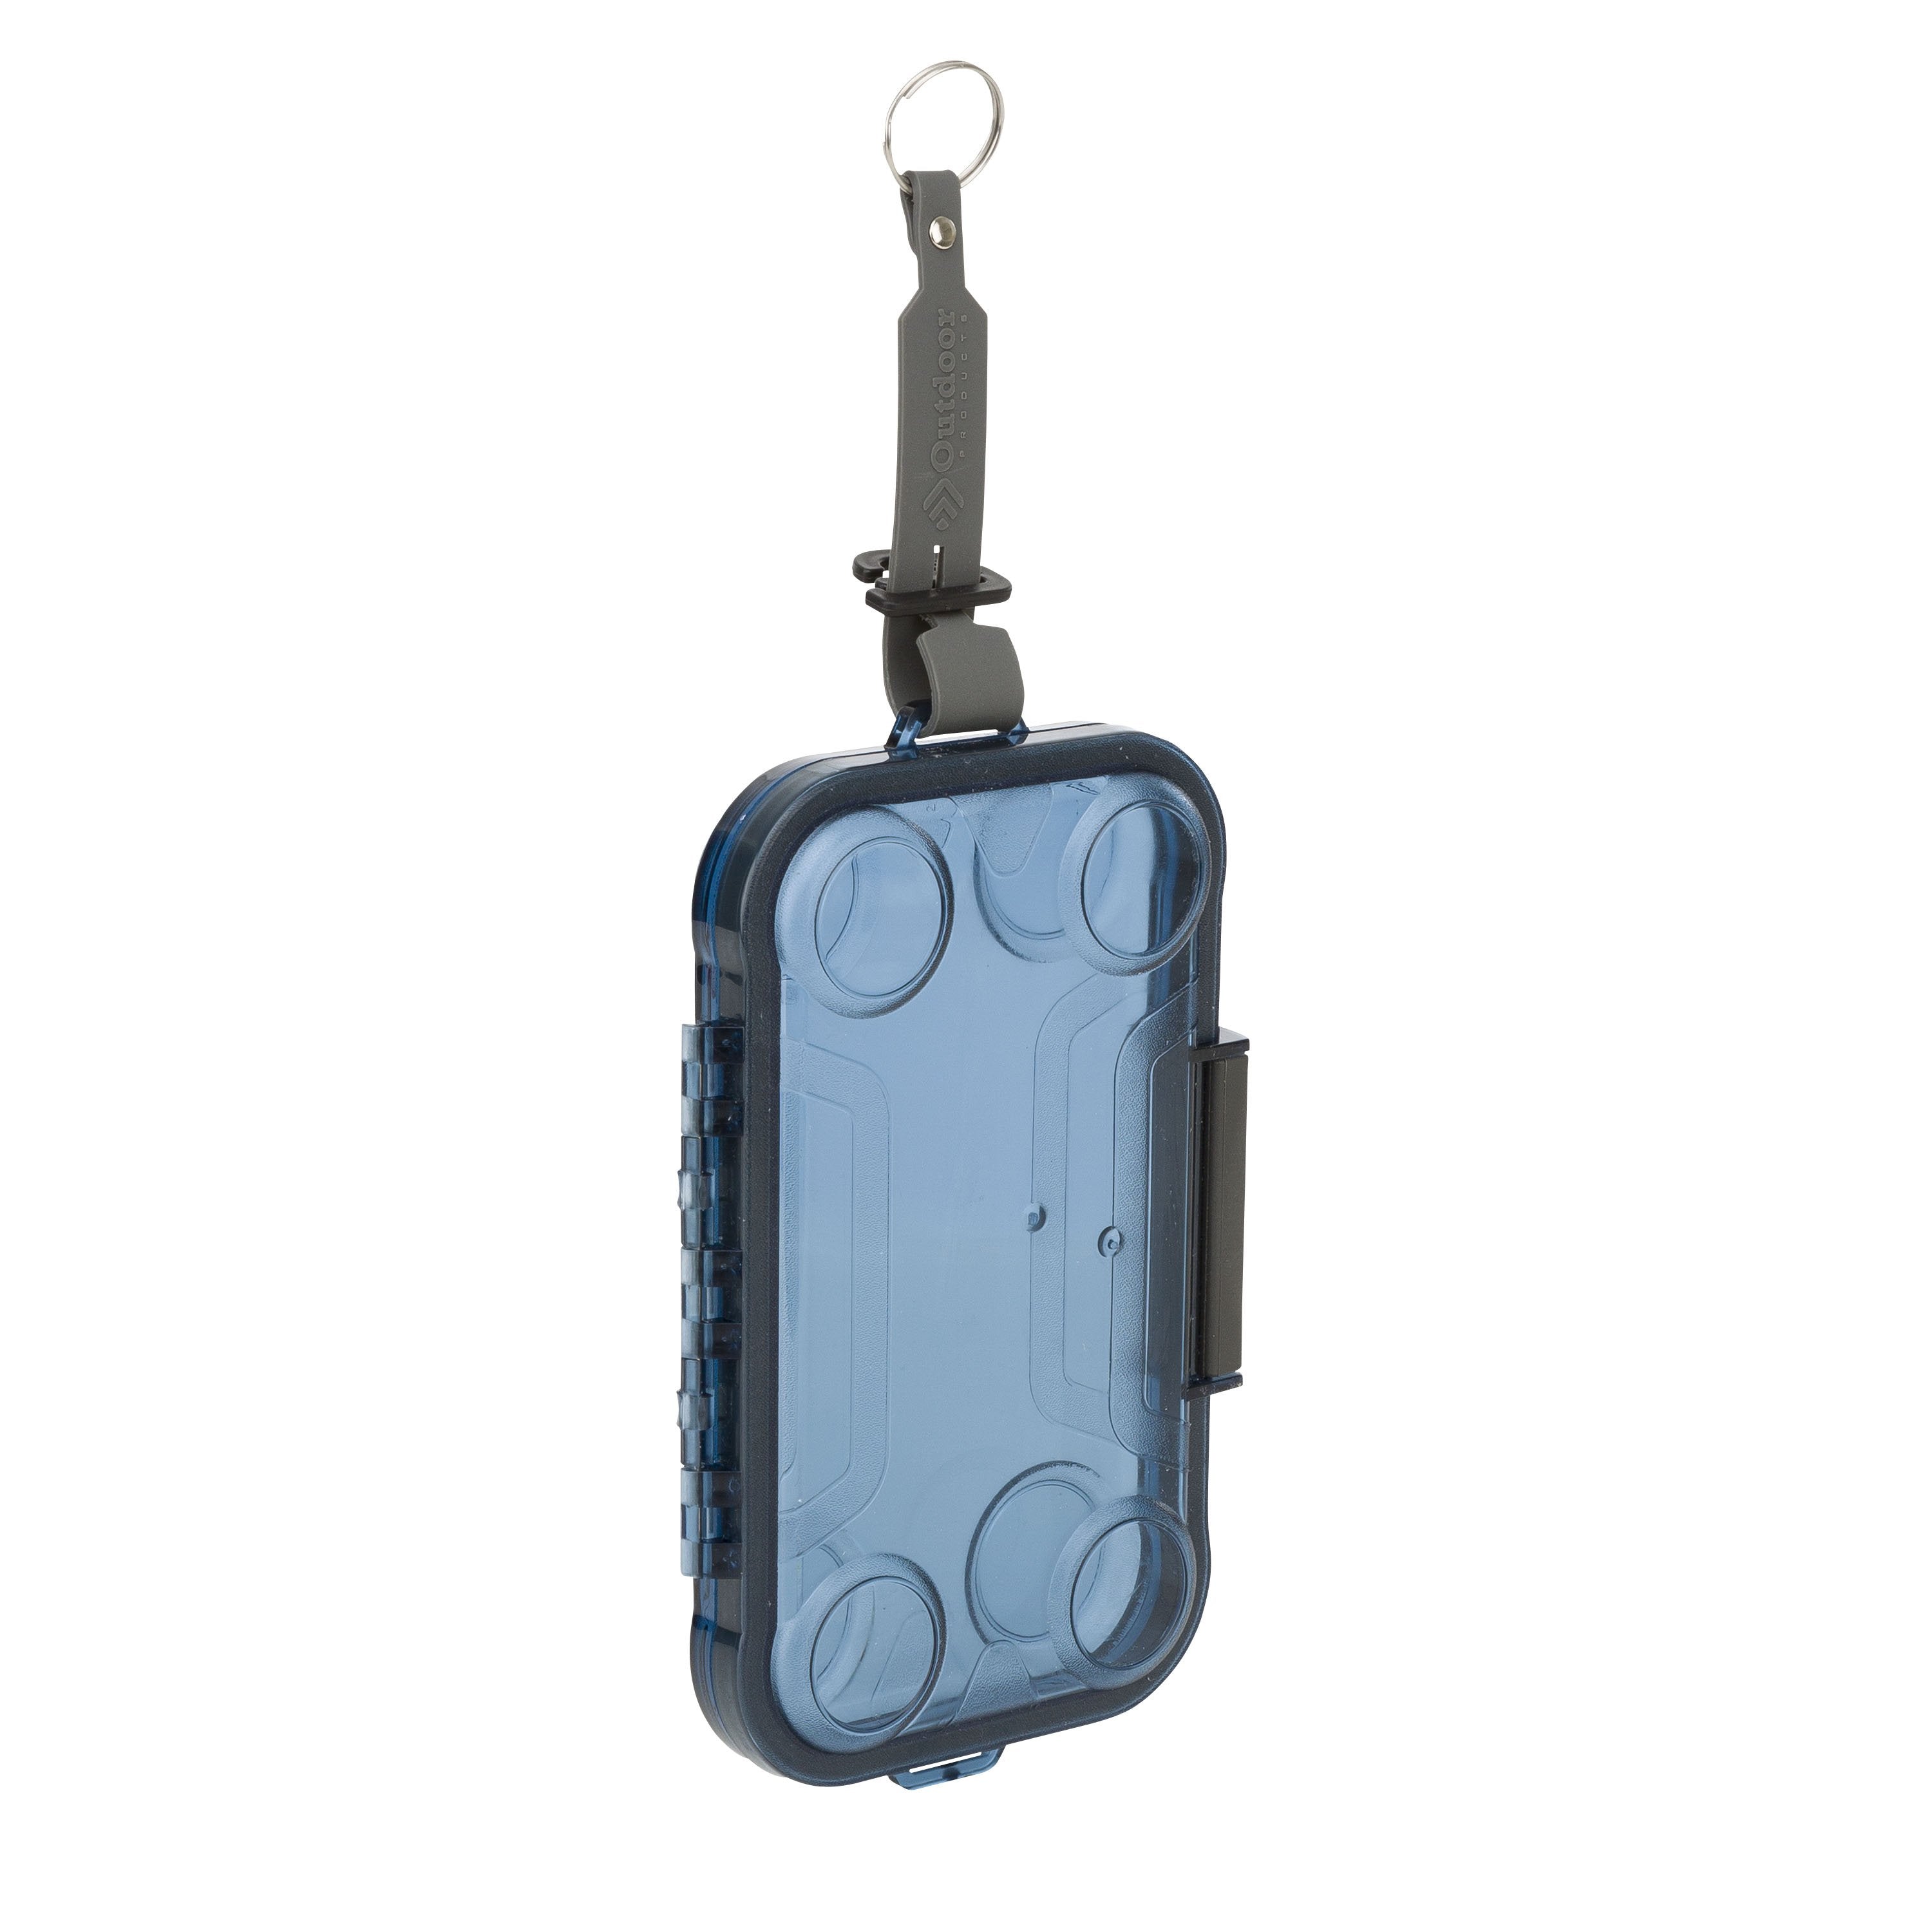 Smartphone Watertight Case, Large – Outdoor Products